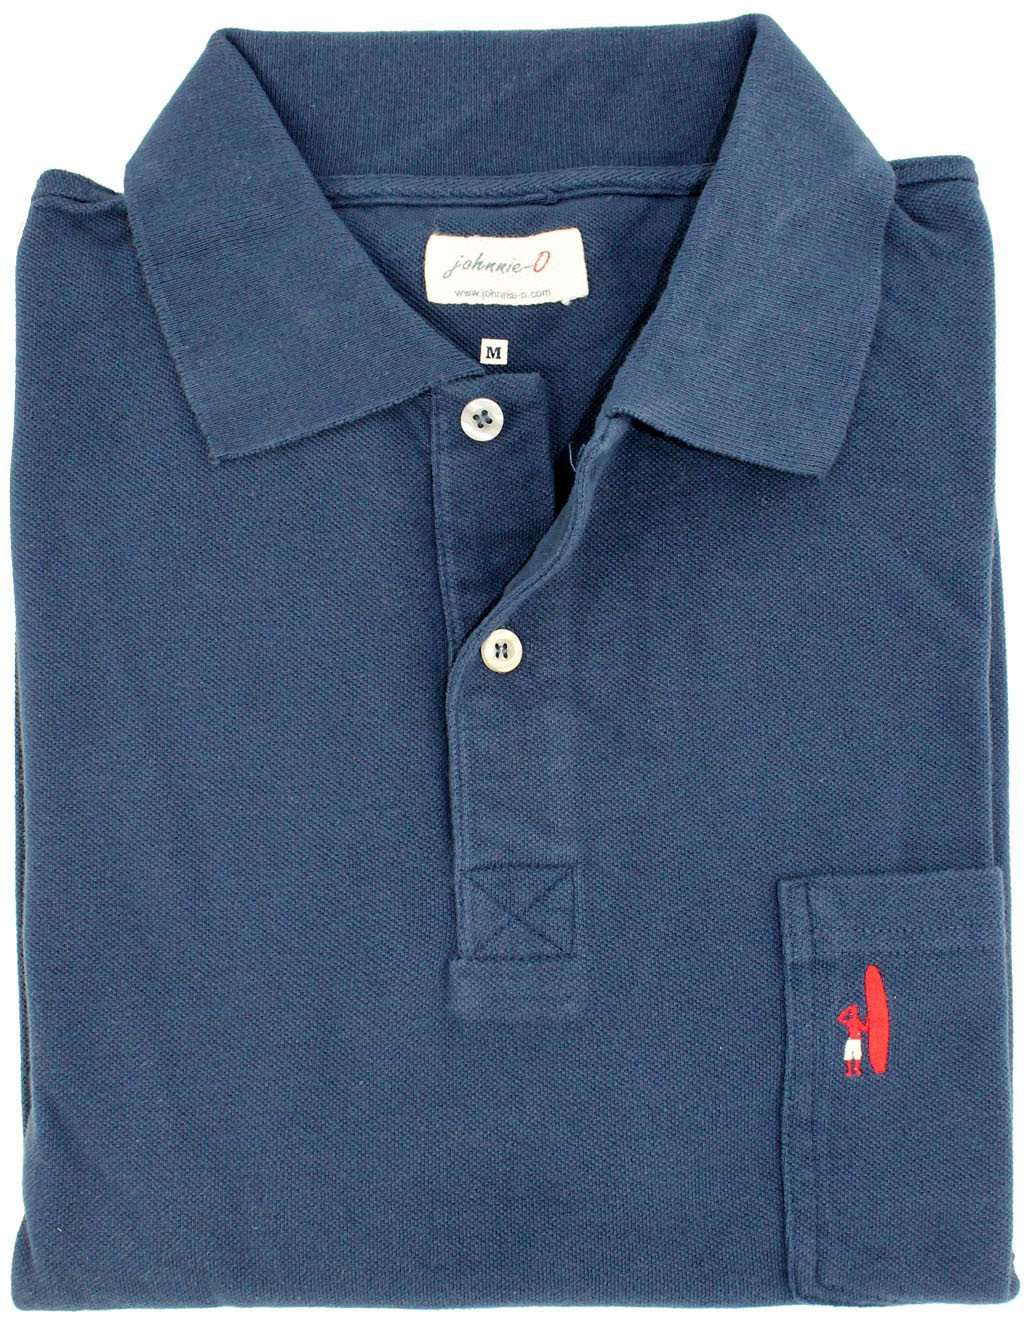 The Long Sleeve Pique Polo in Navy Blue by Johnnie-O - Country Club Prep